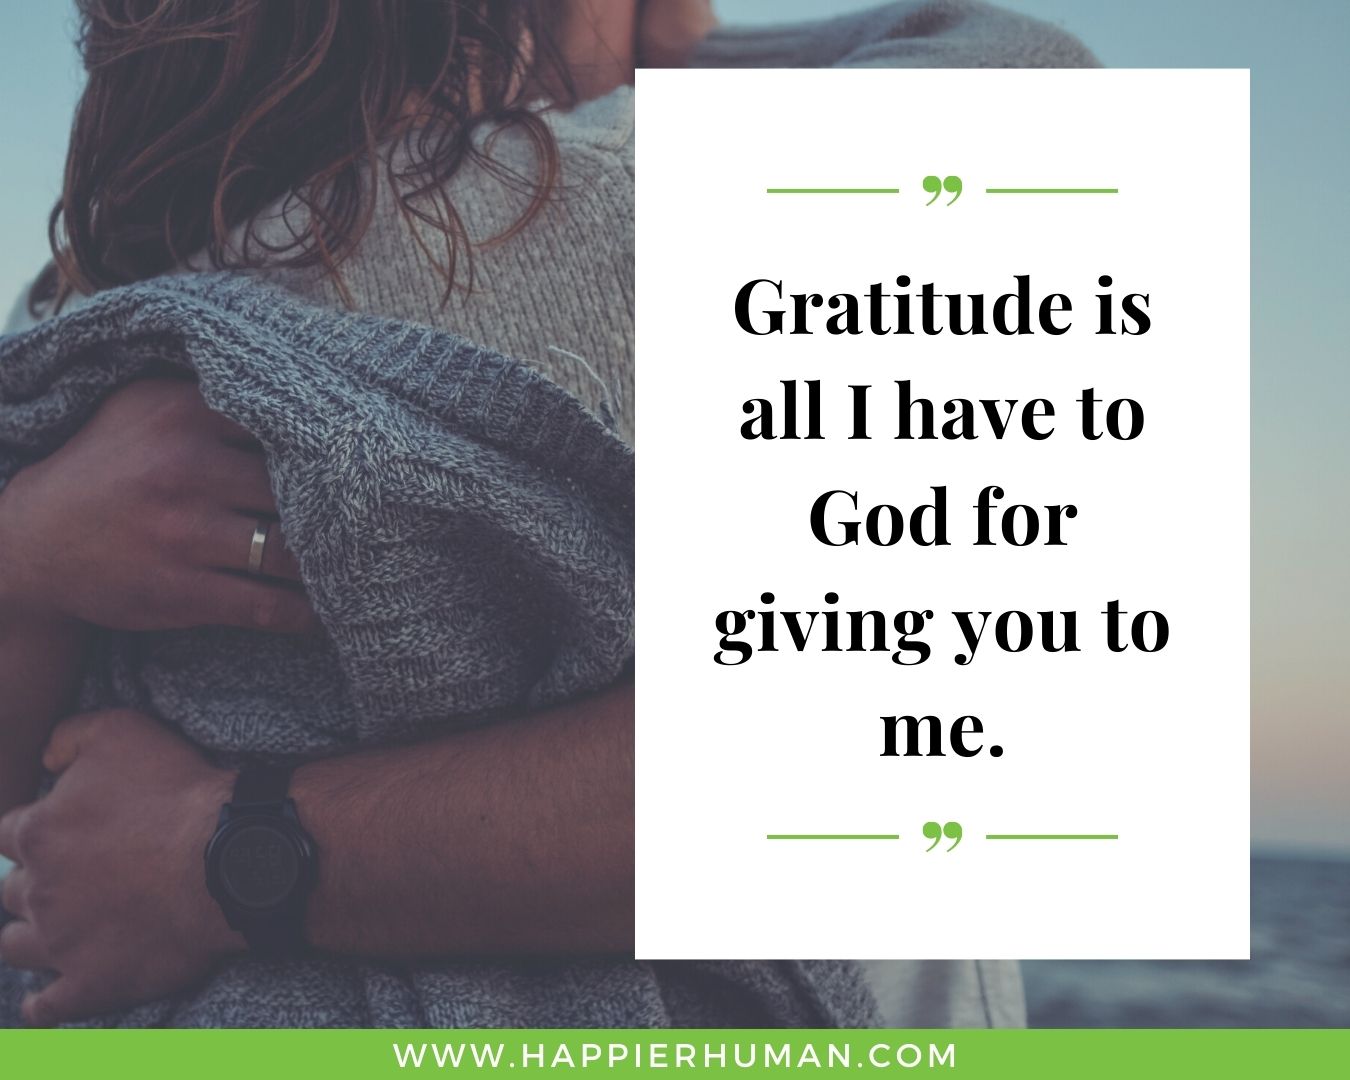 Short, Deep Love Quotes for Her - “Gratitude is all I have to God for giving you to me.”